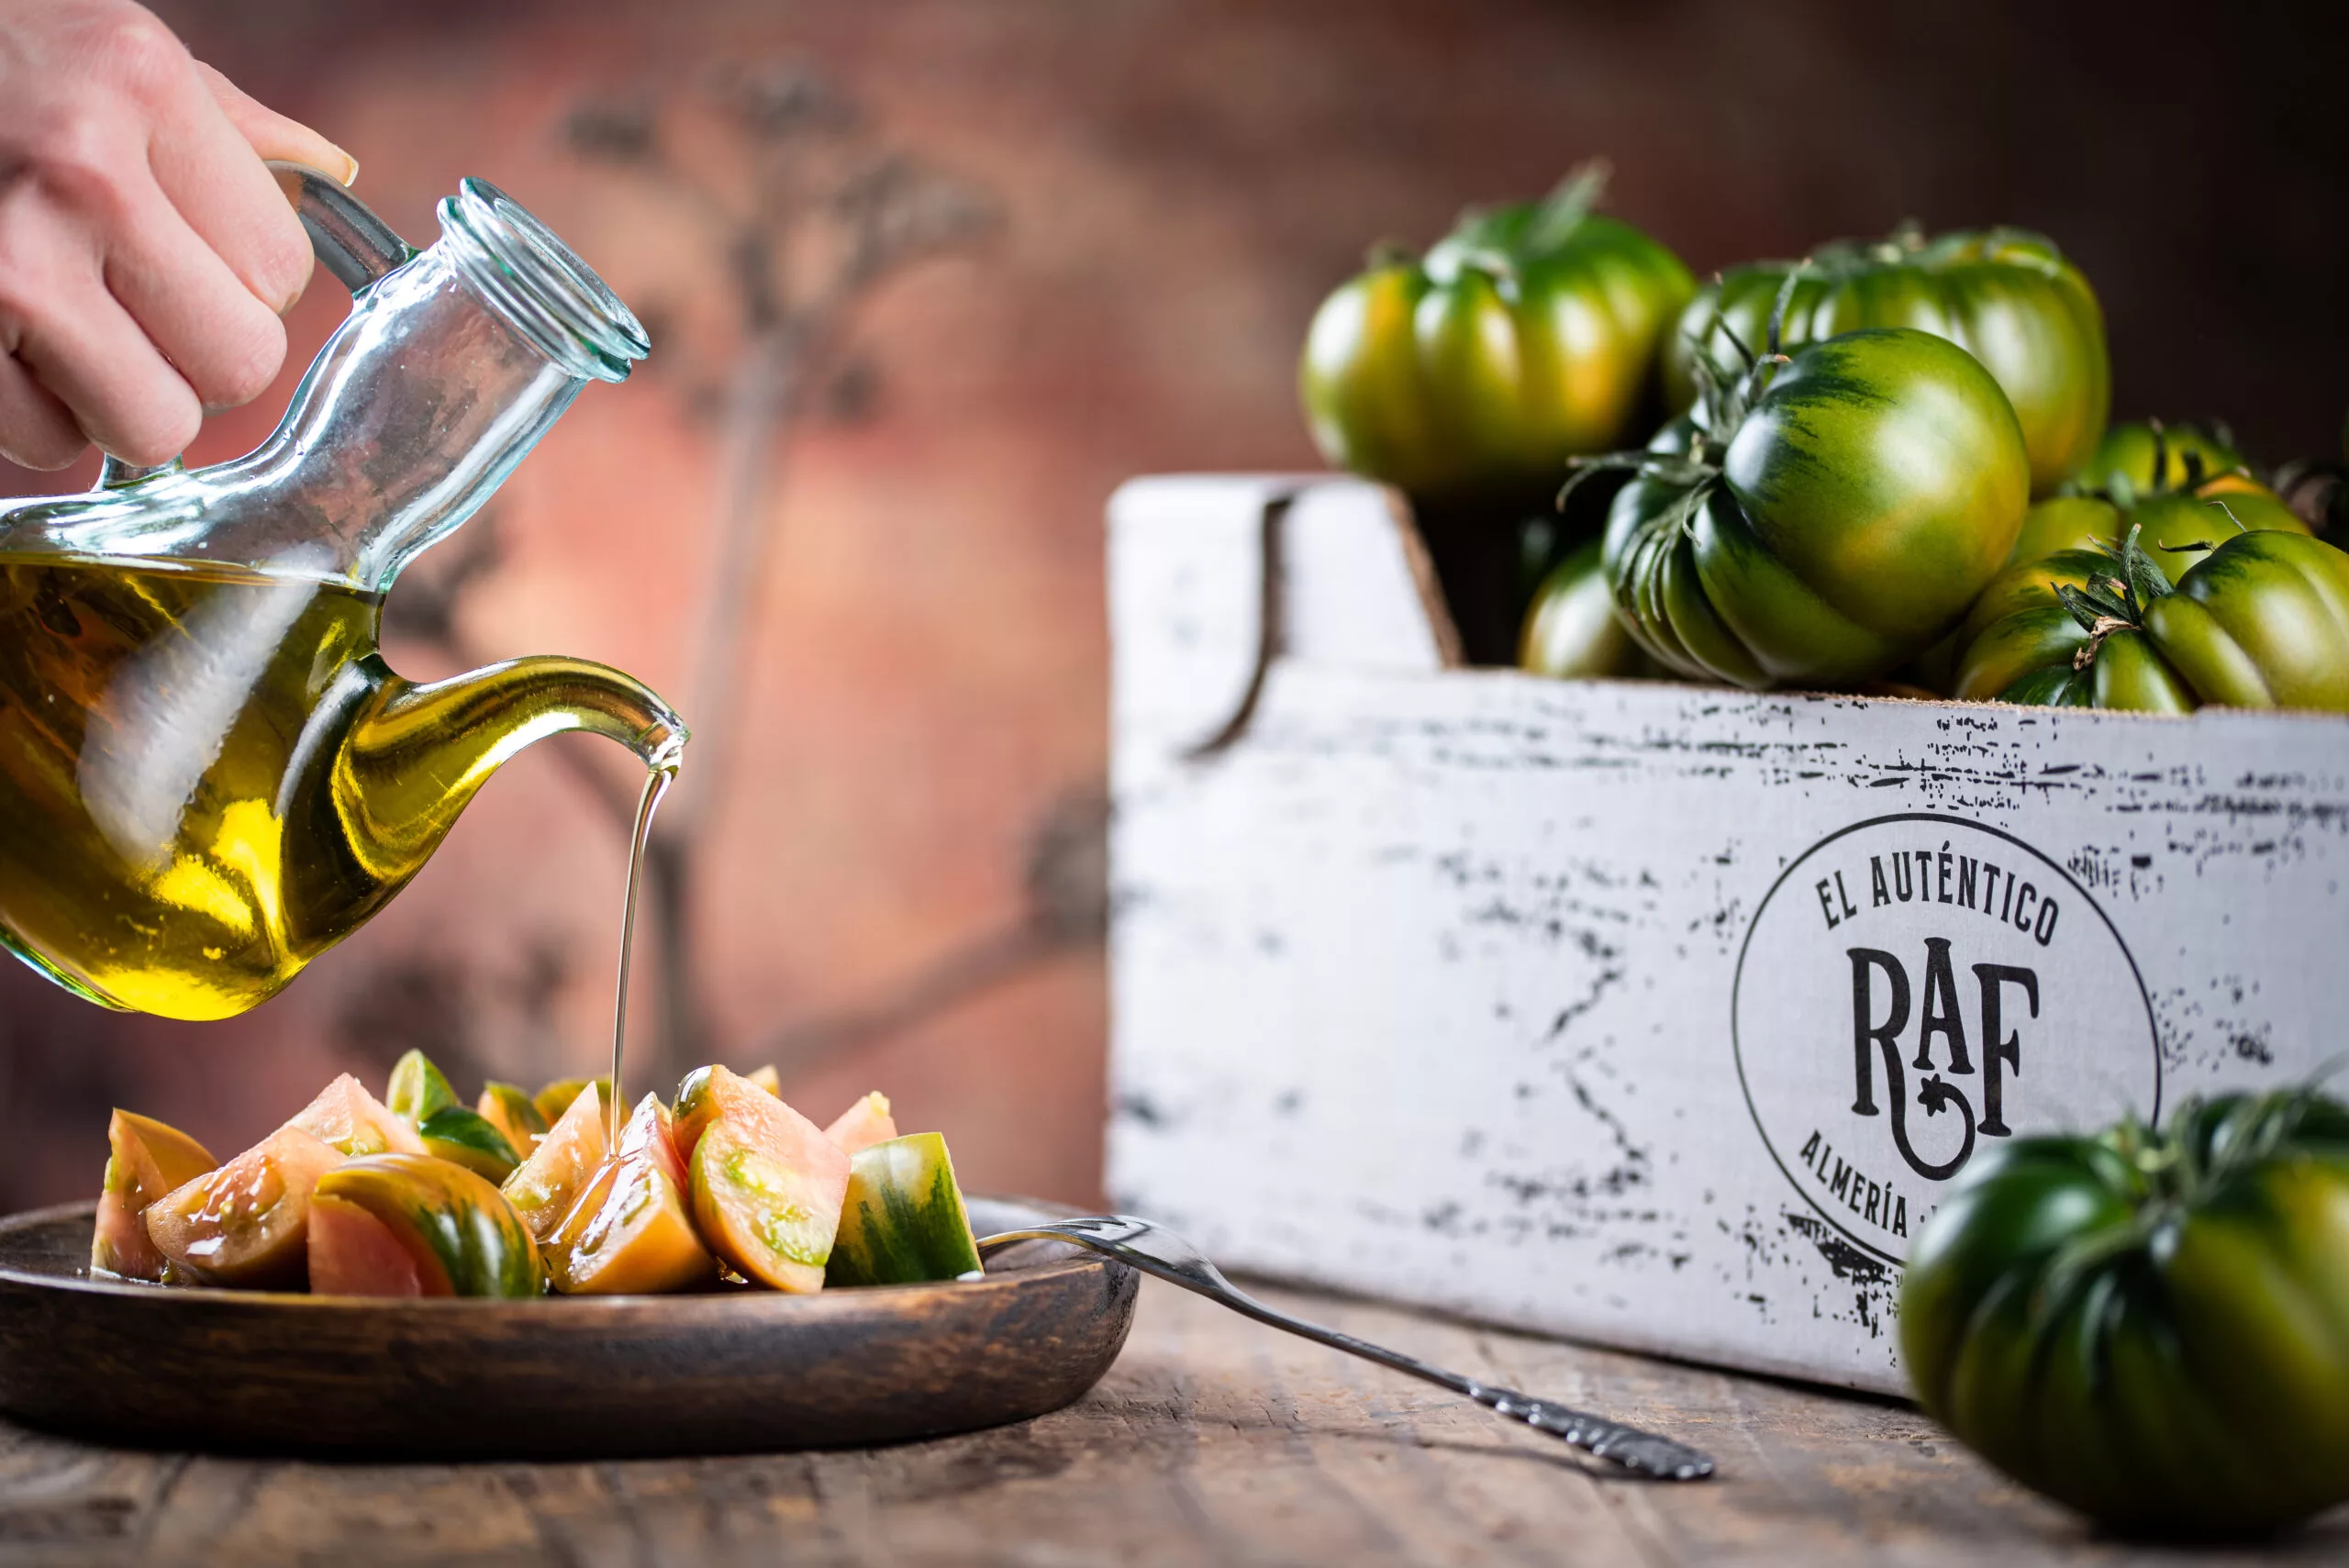 Our top one product, the Raf tomato.